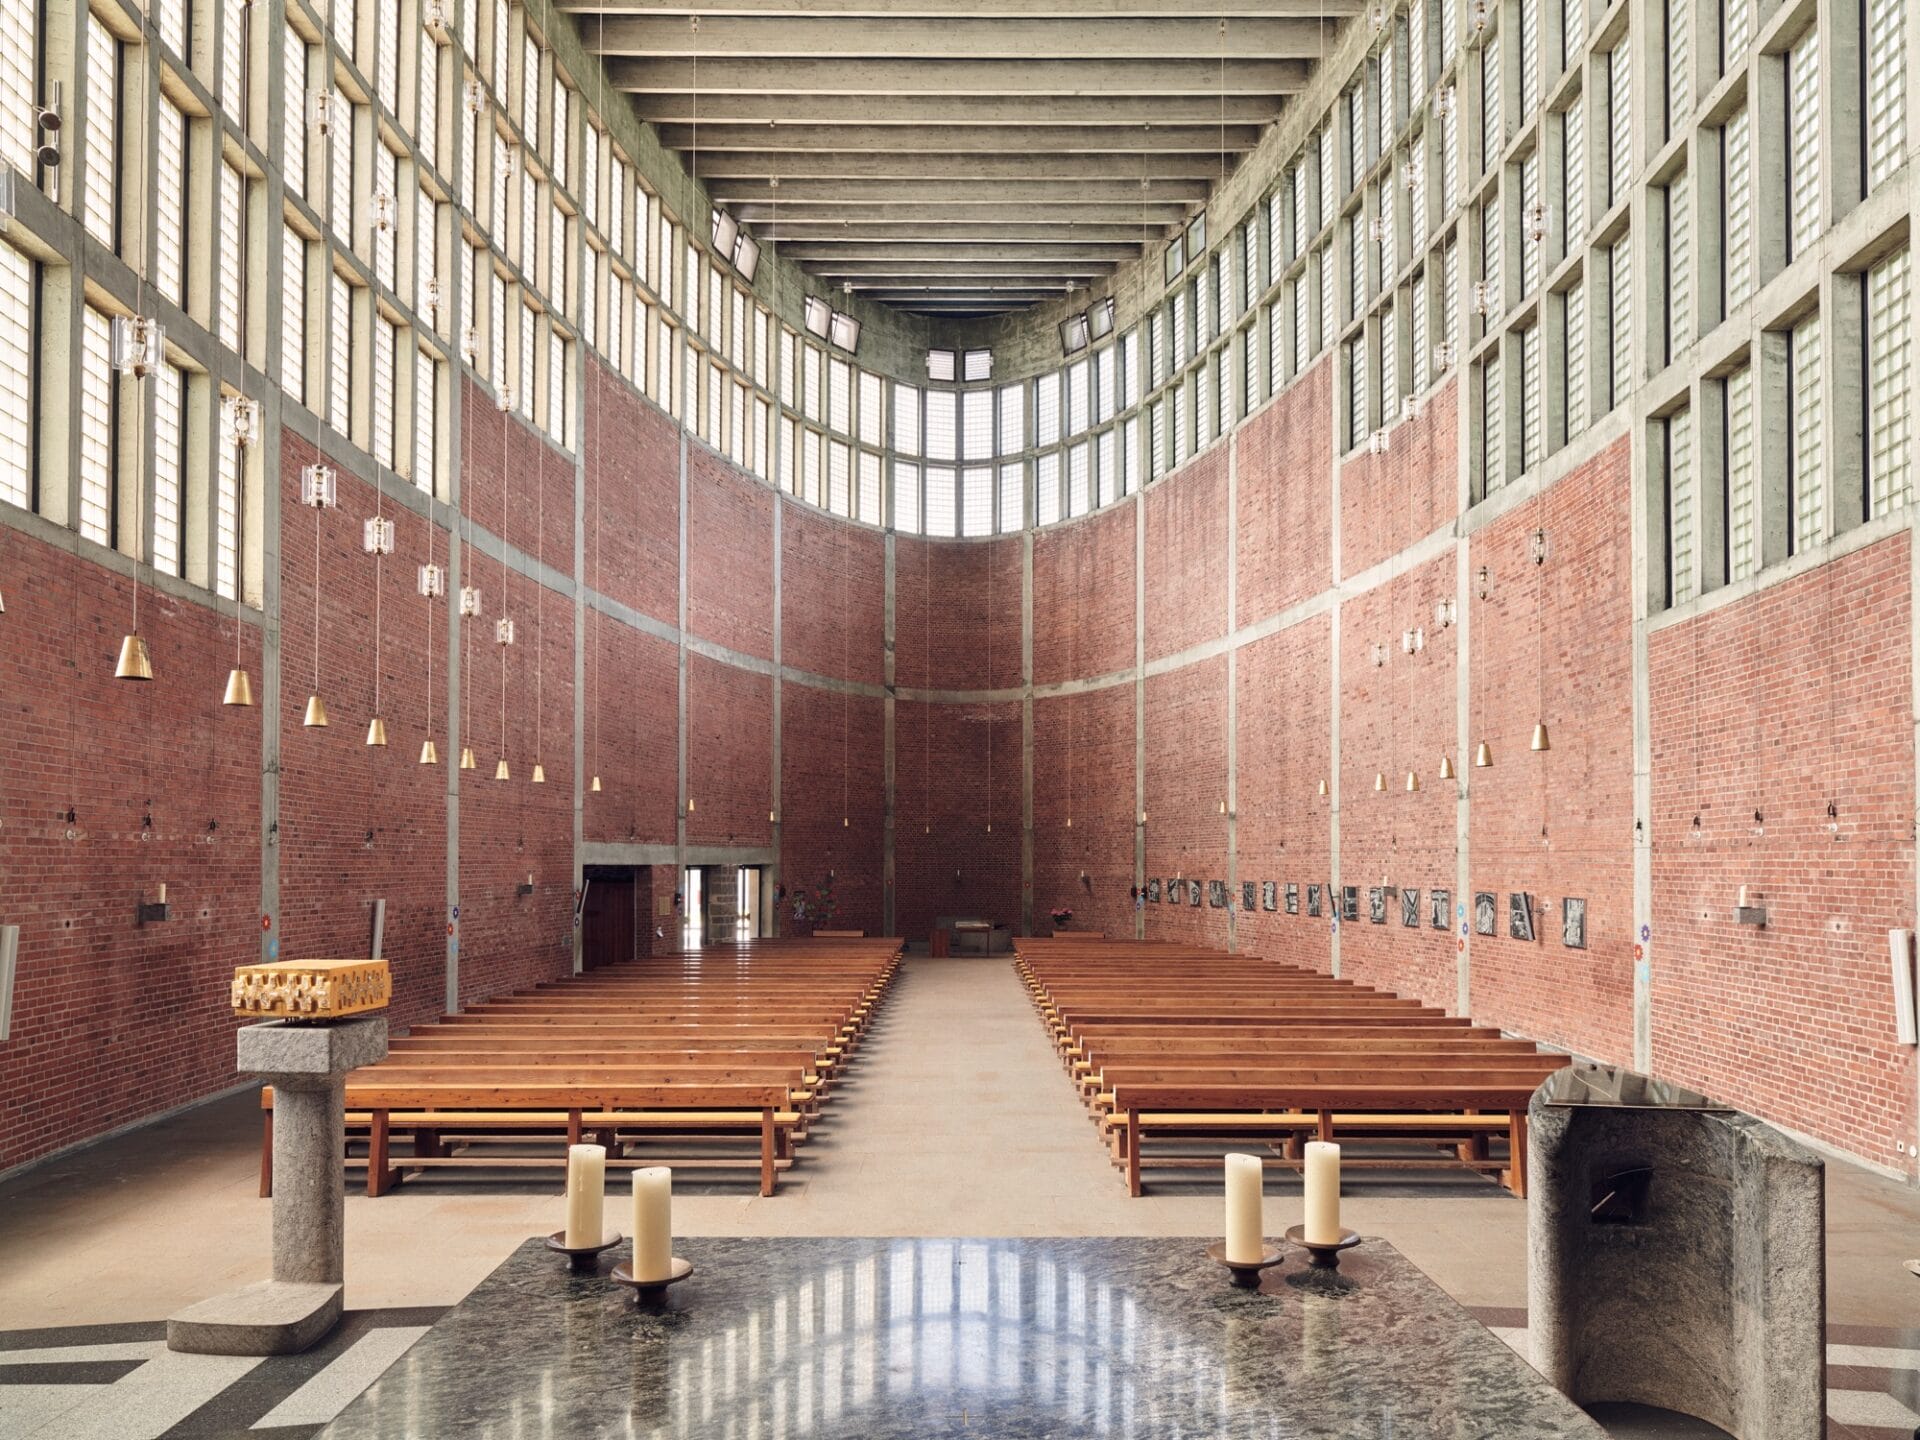 an interior overview of a large brutalist church with curved brick and concrete walls and wooden pews